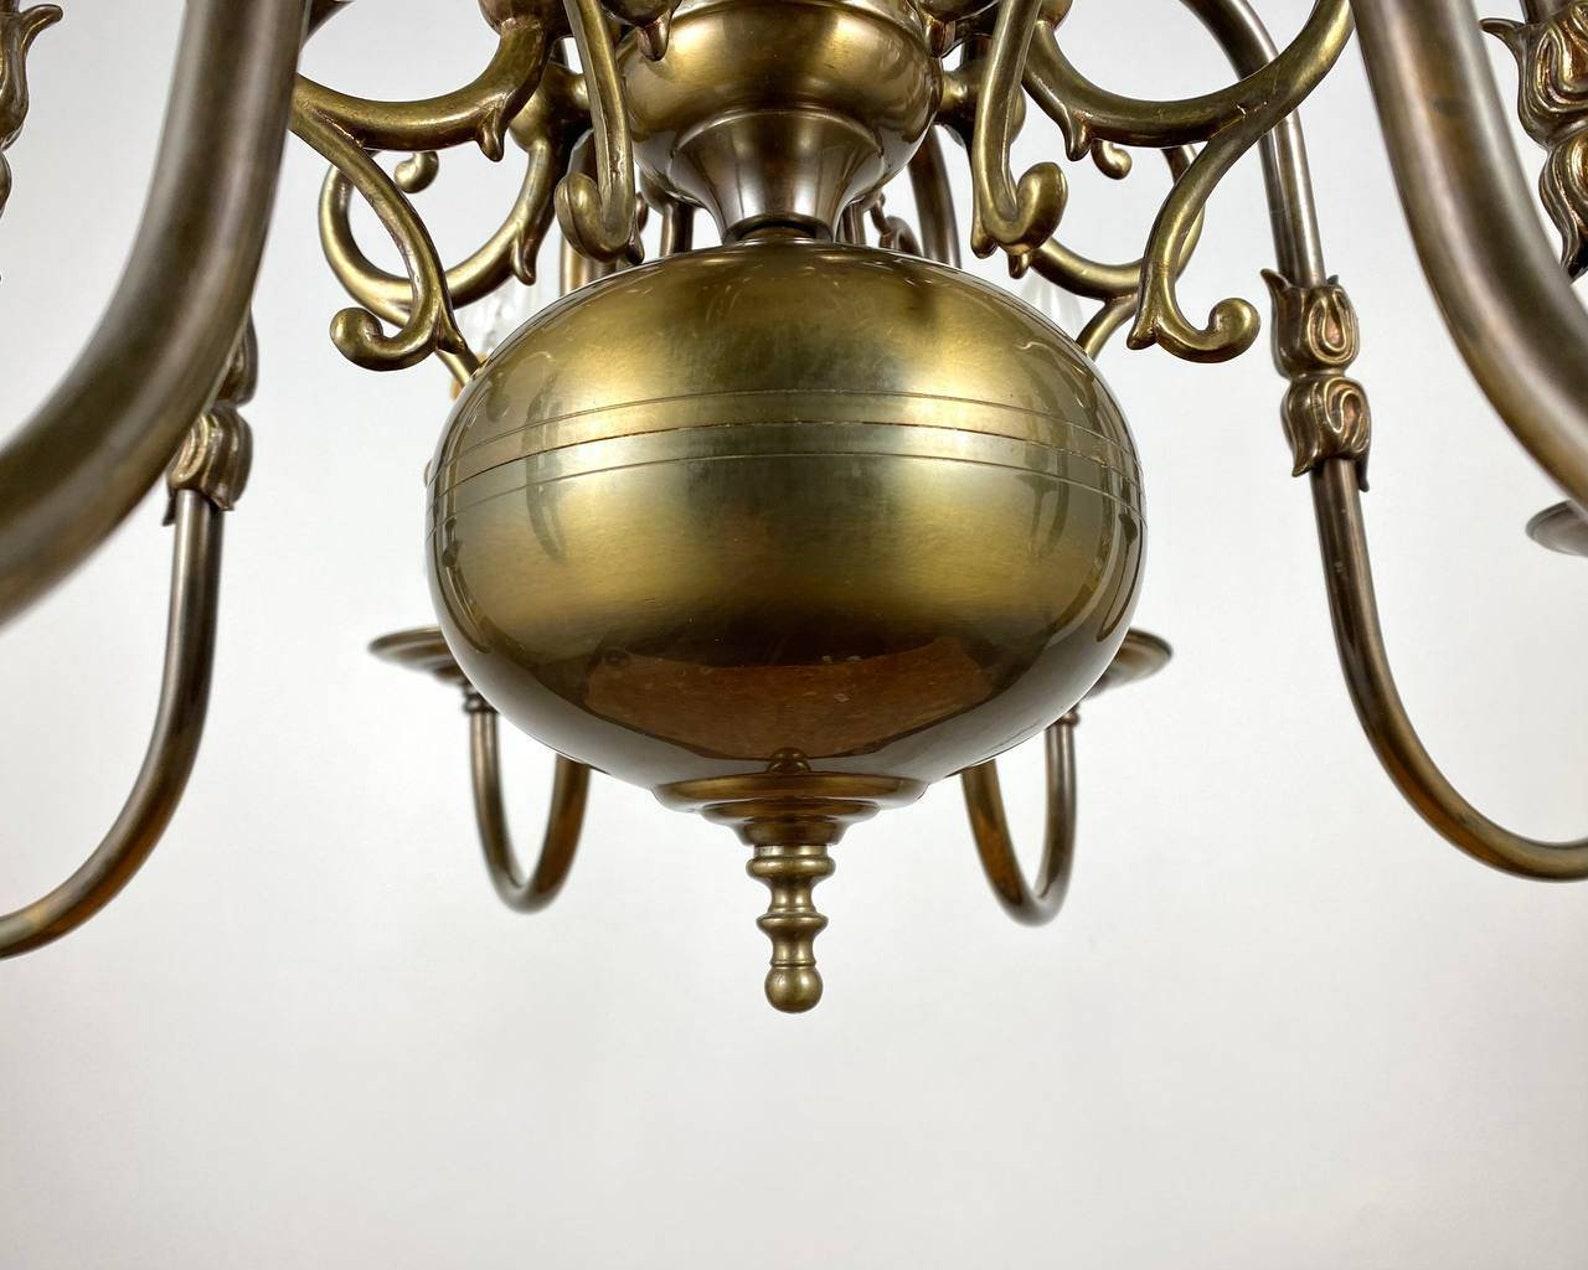 Vintage Chandelier With Double-Headed Eagle Flemish-Style Brass Lighting 2